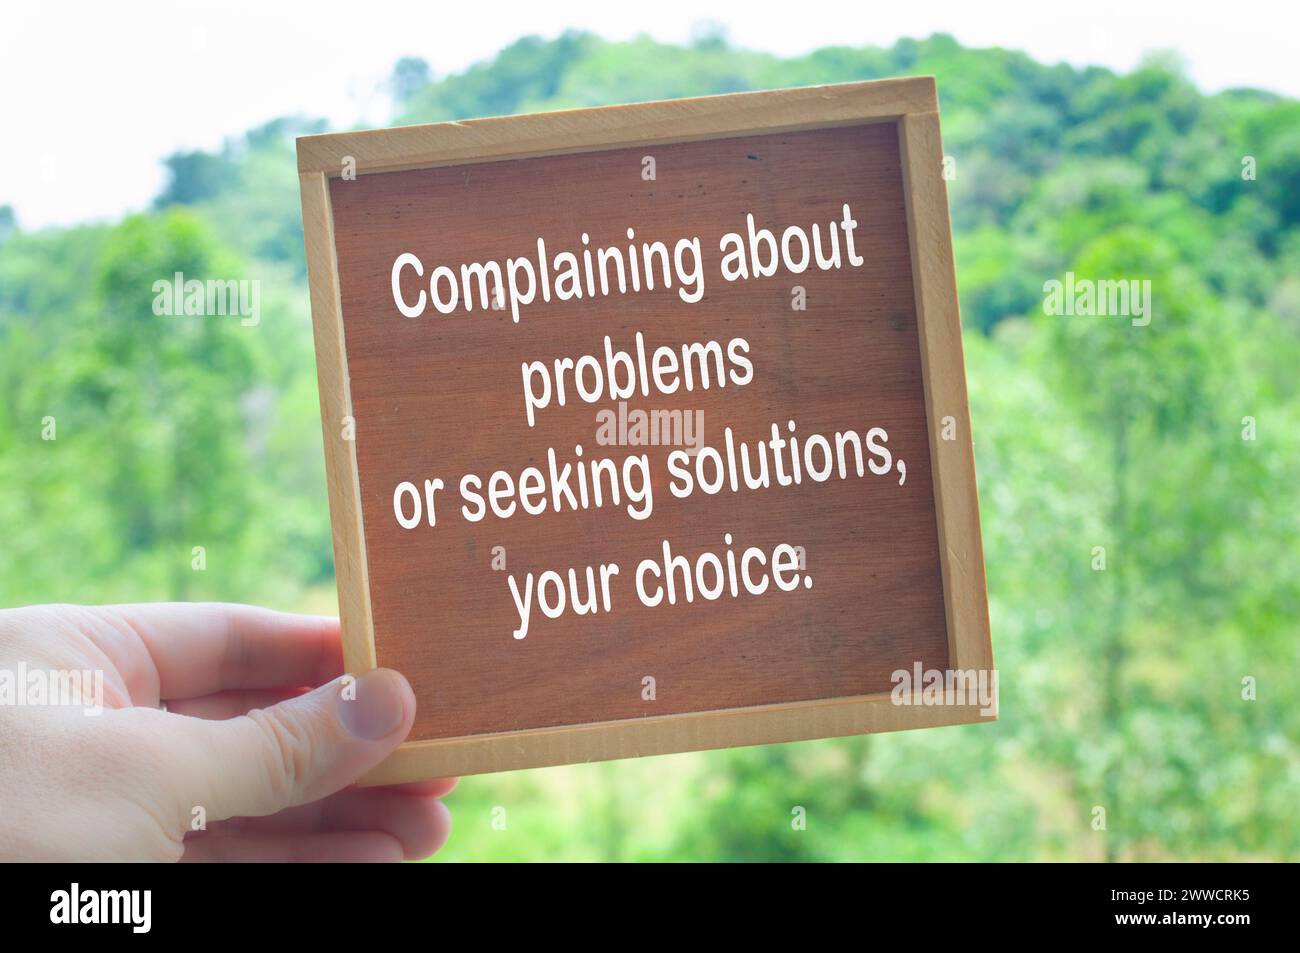 Choice concept about complaining and problems. Own choice concept. Stock Photo